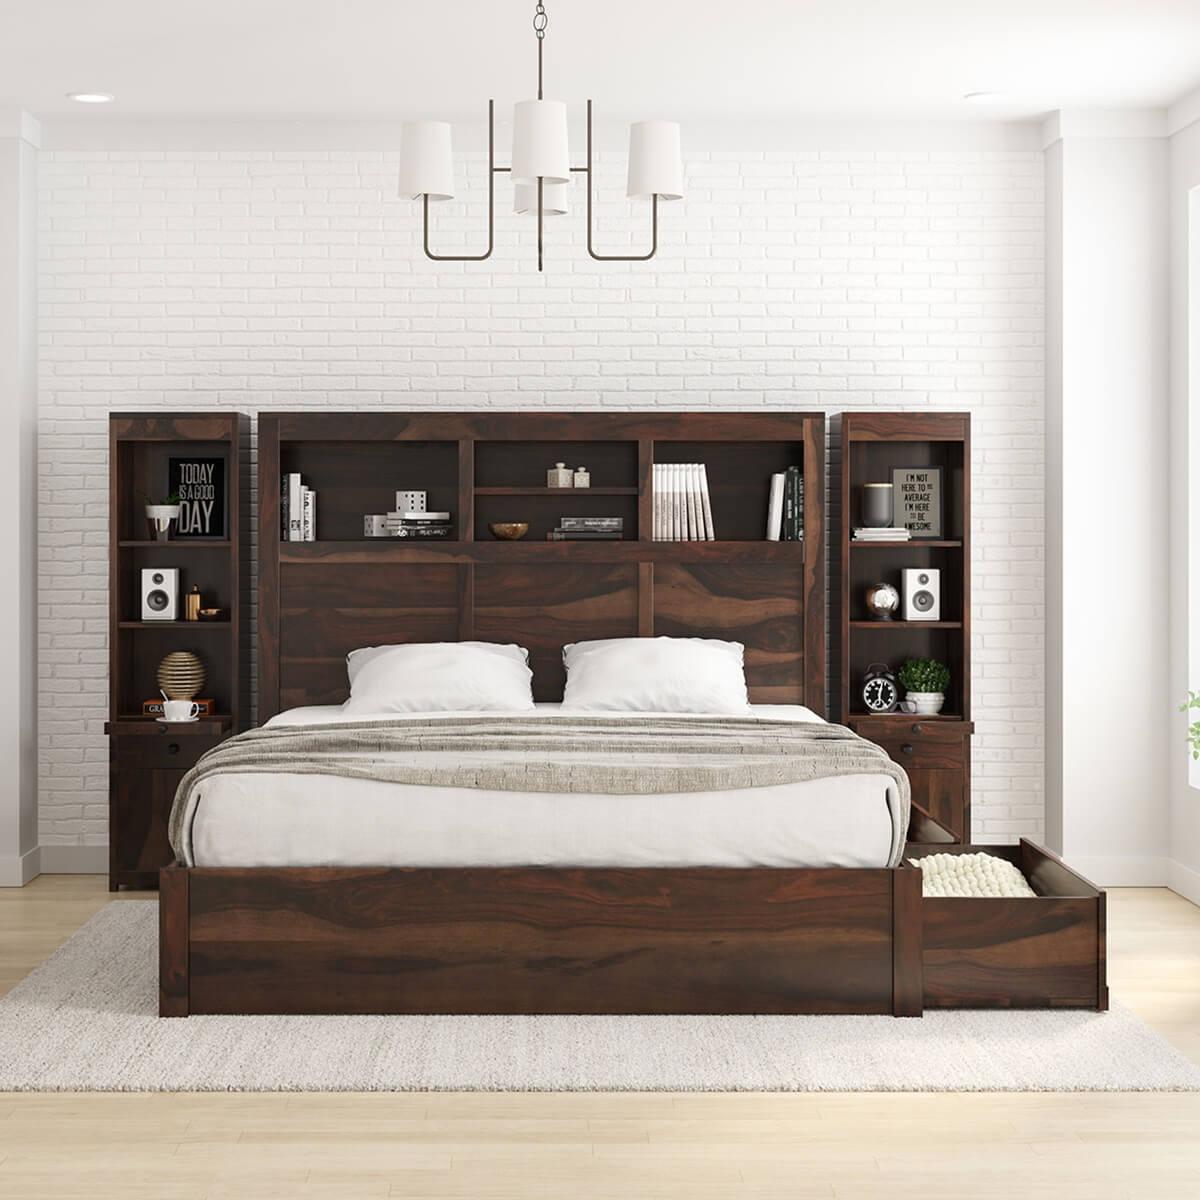 How To Attach A Headboard Any Bed, Do All Headboards Fit All Bed Frames